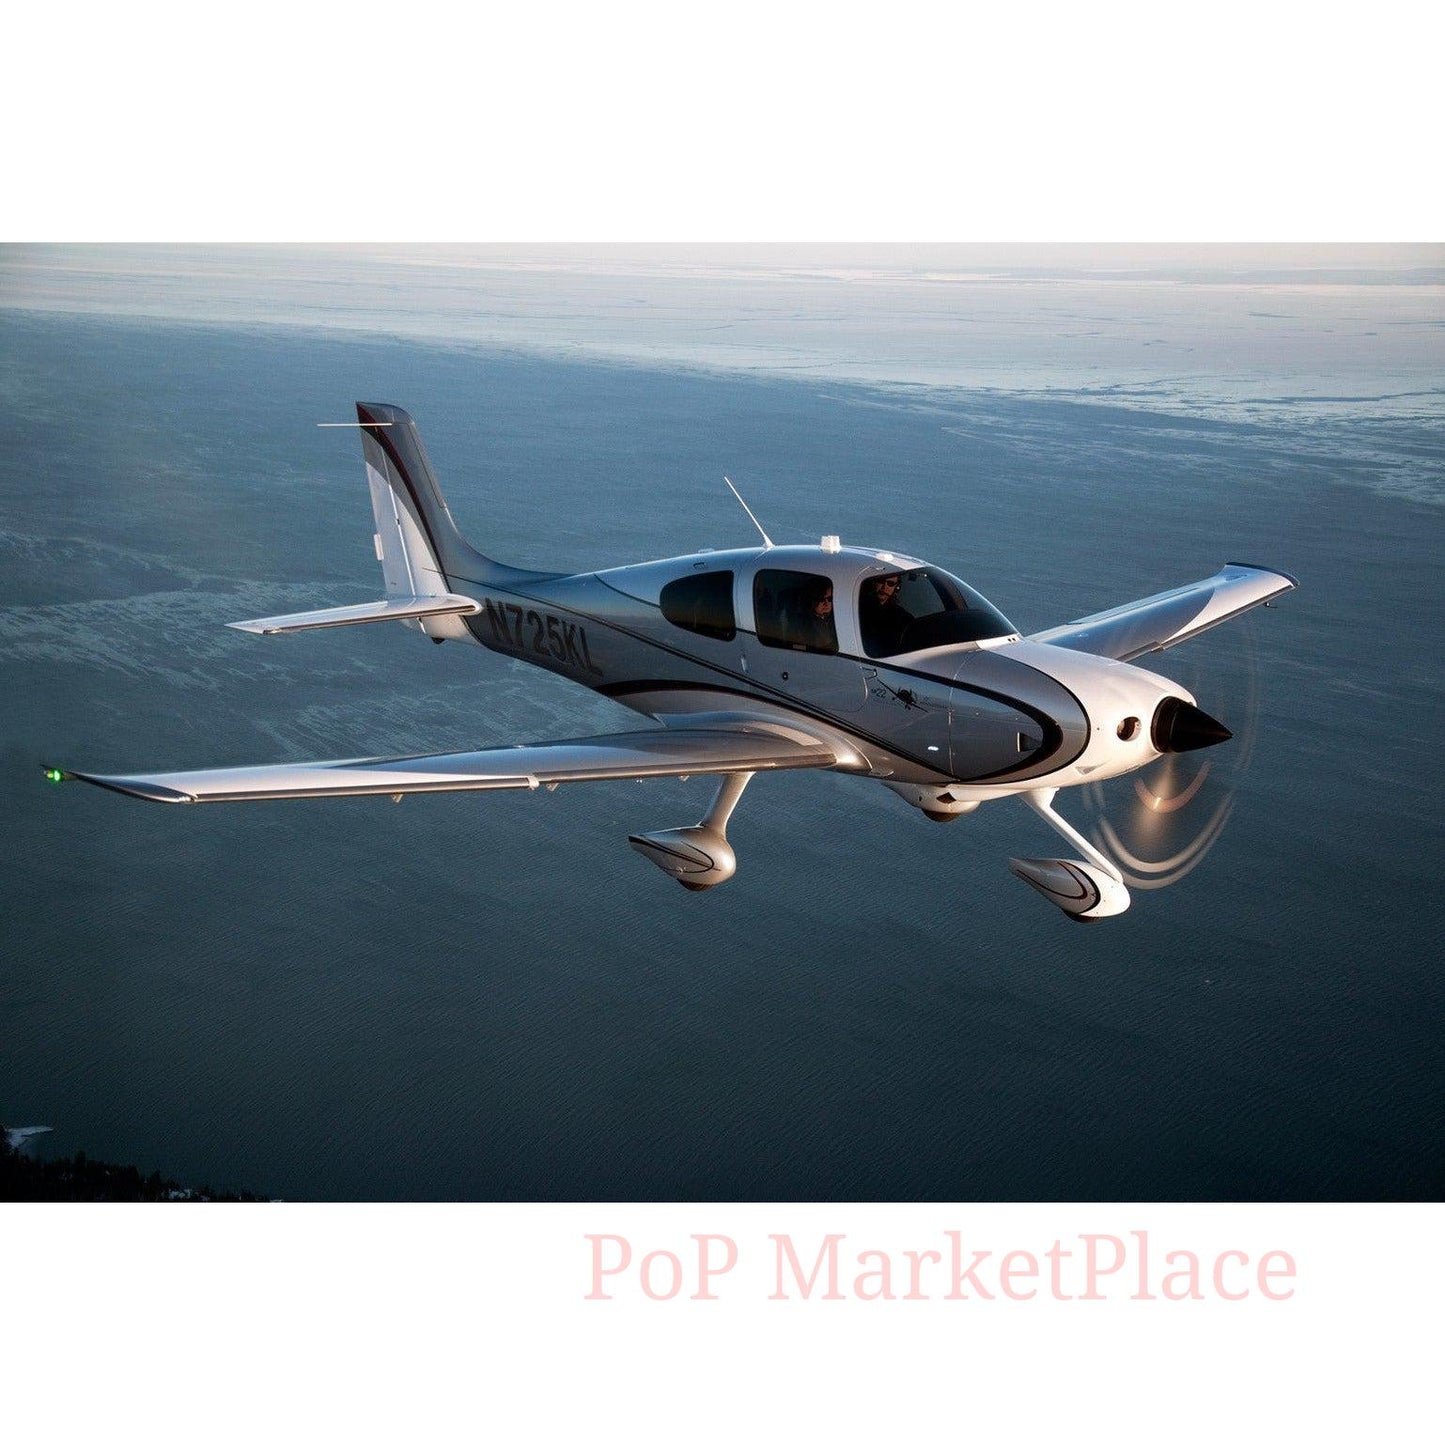 Buy pre-owned jet get access wild marketplace private jets sale Global Airjet